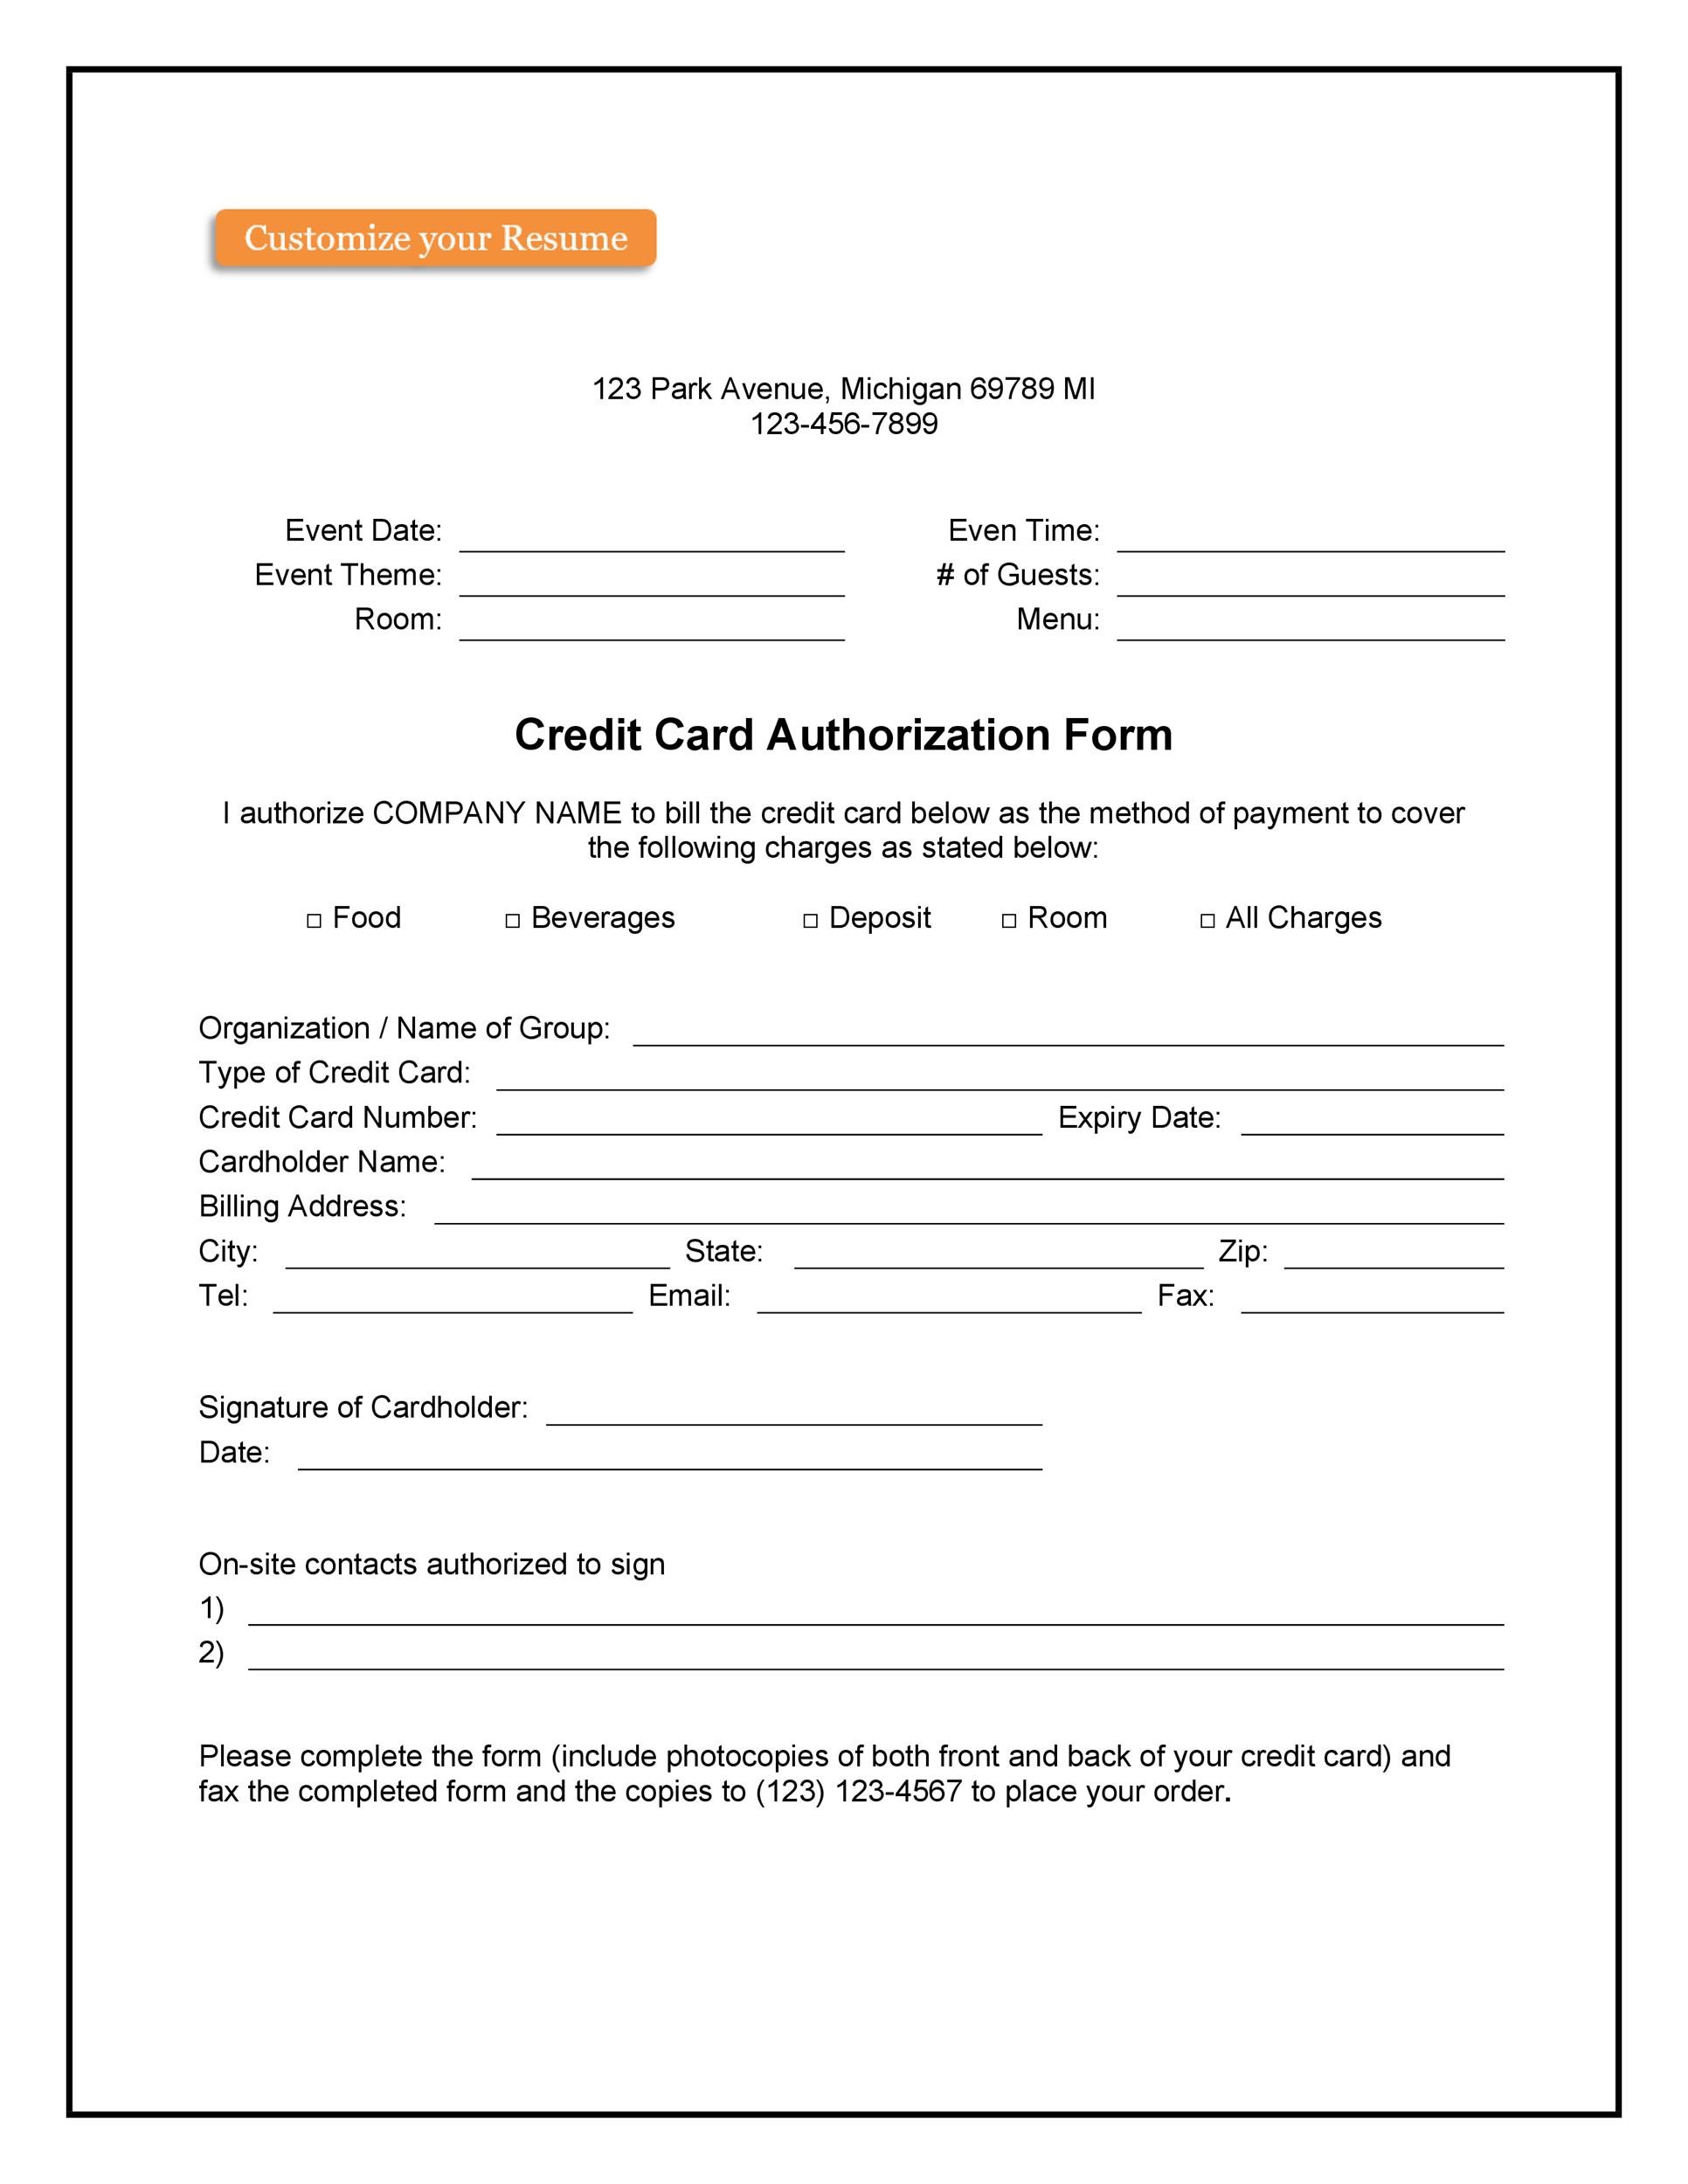 41 Credit Card Authorization Forms Templates Ready To Use 7570